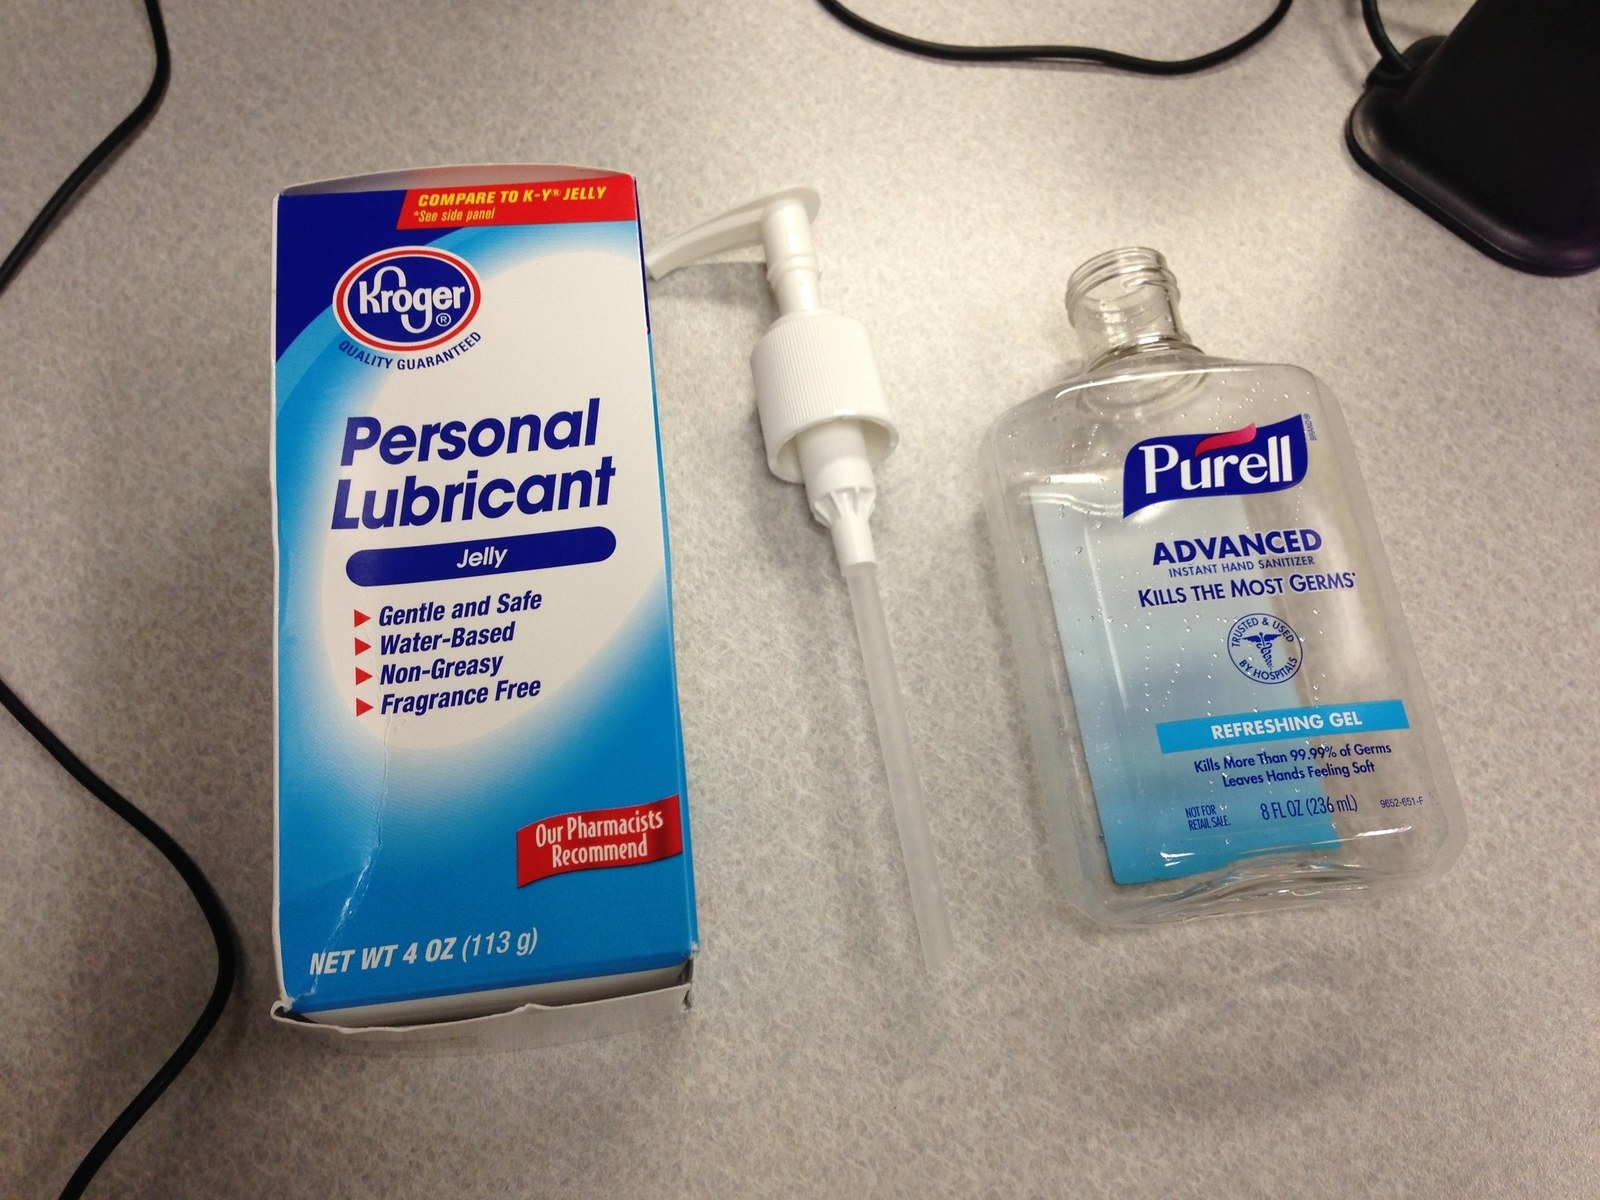 Kroger brand personal lubricant next to a Purell hand sanitizer bottle on a desk